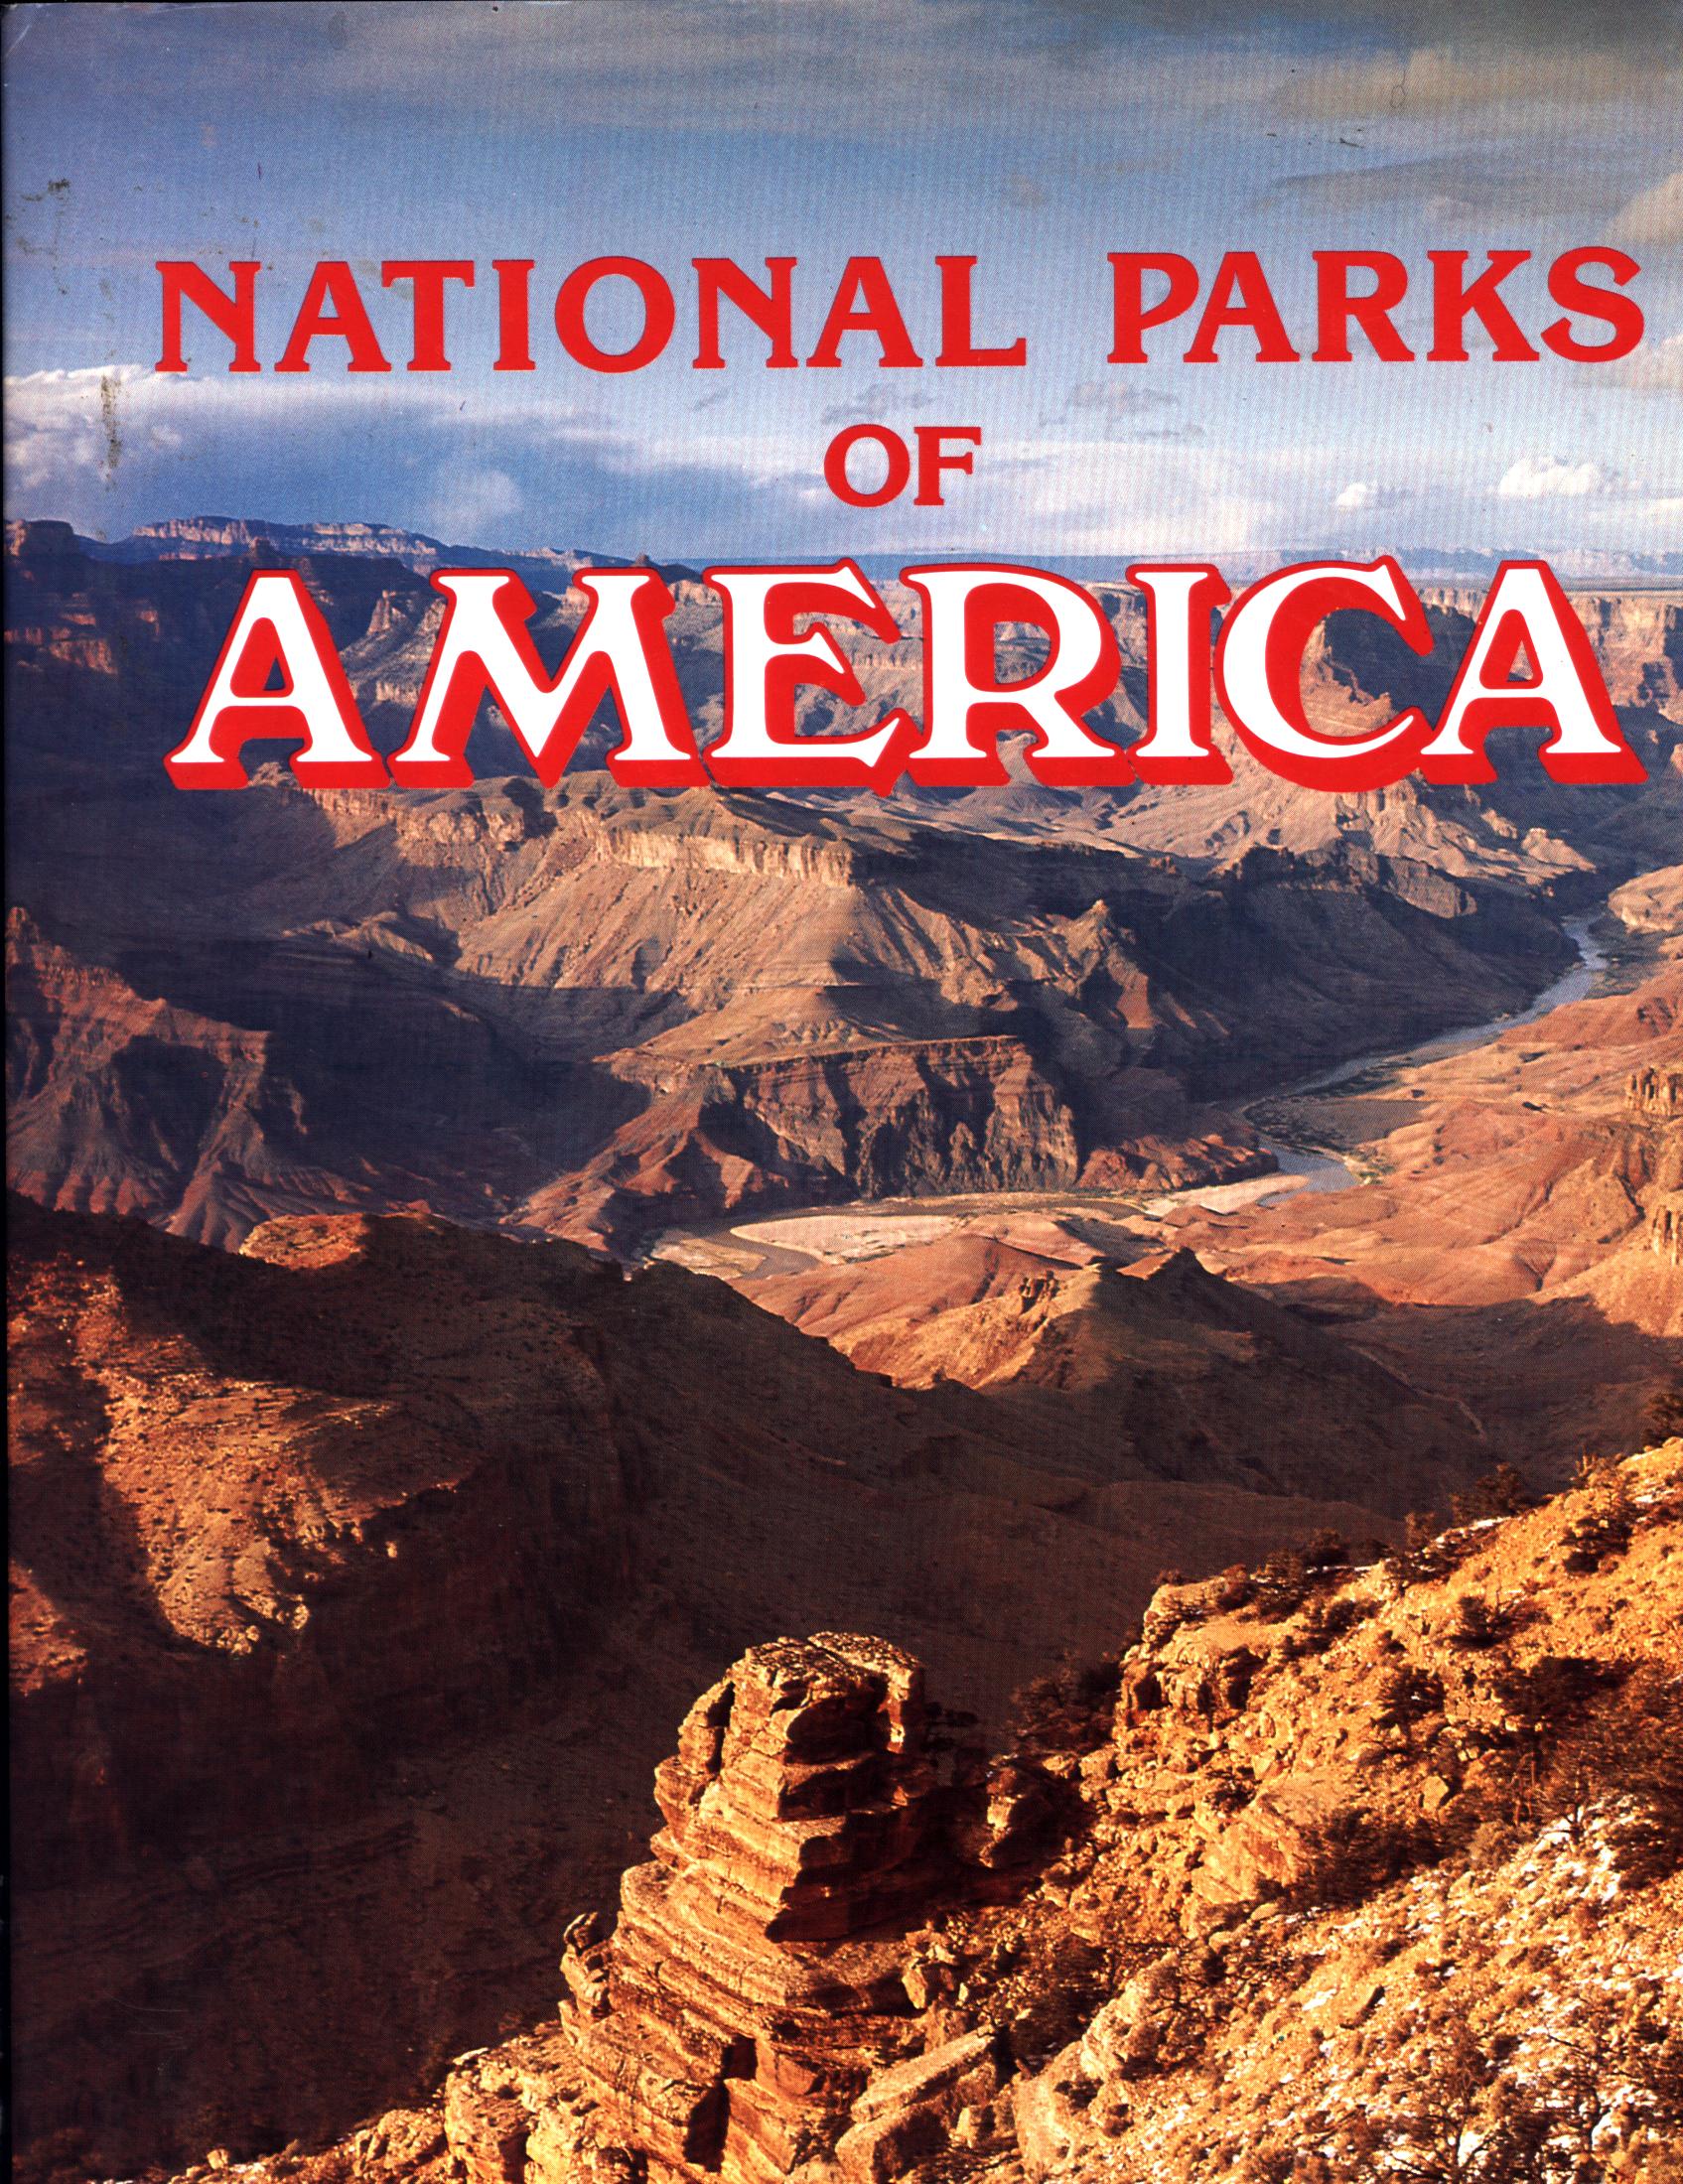 NATIONAL PARKS OF AMERICA. 